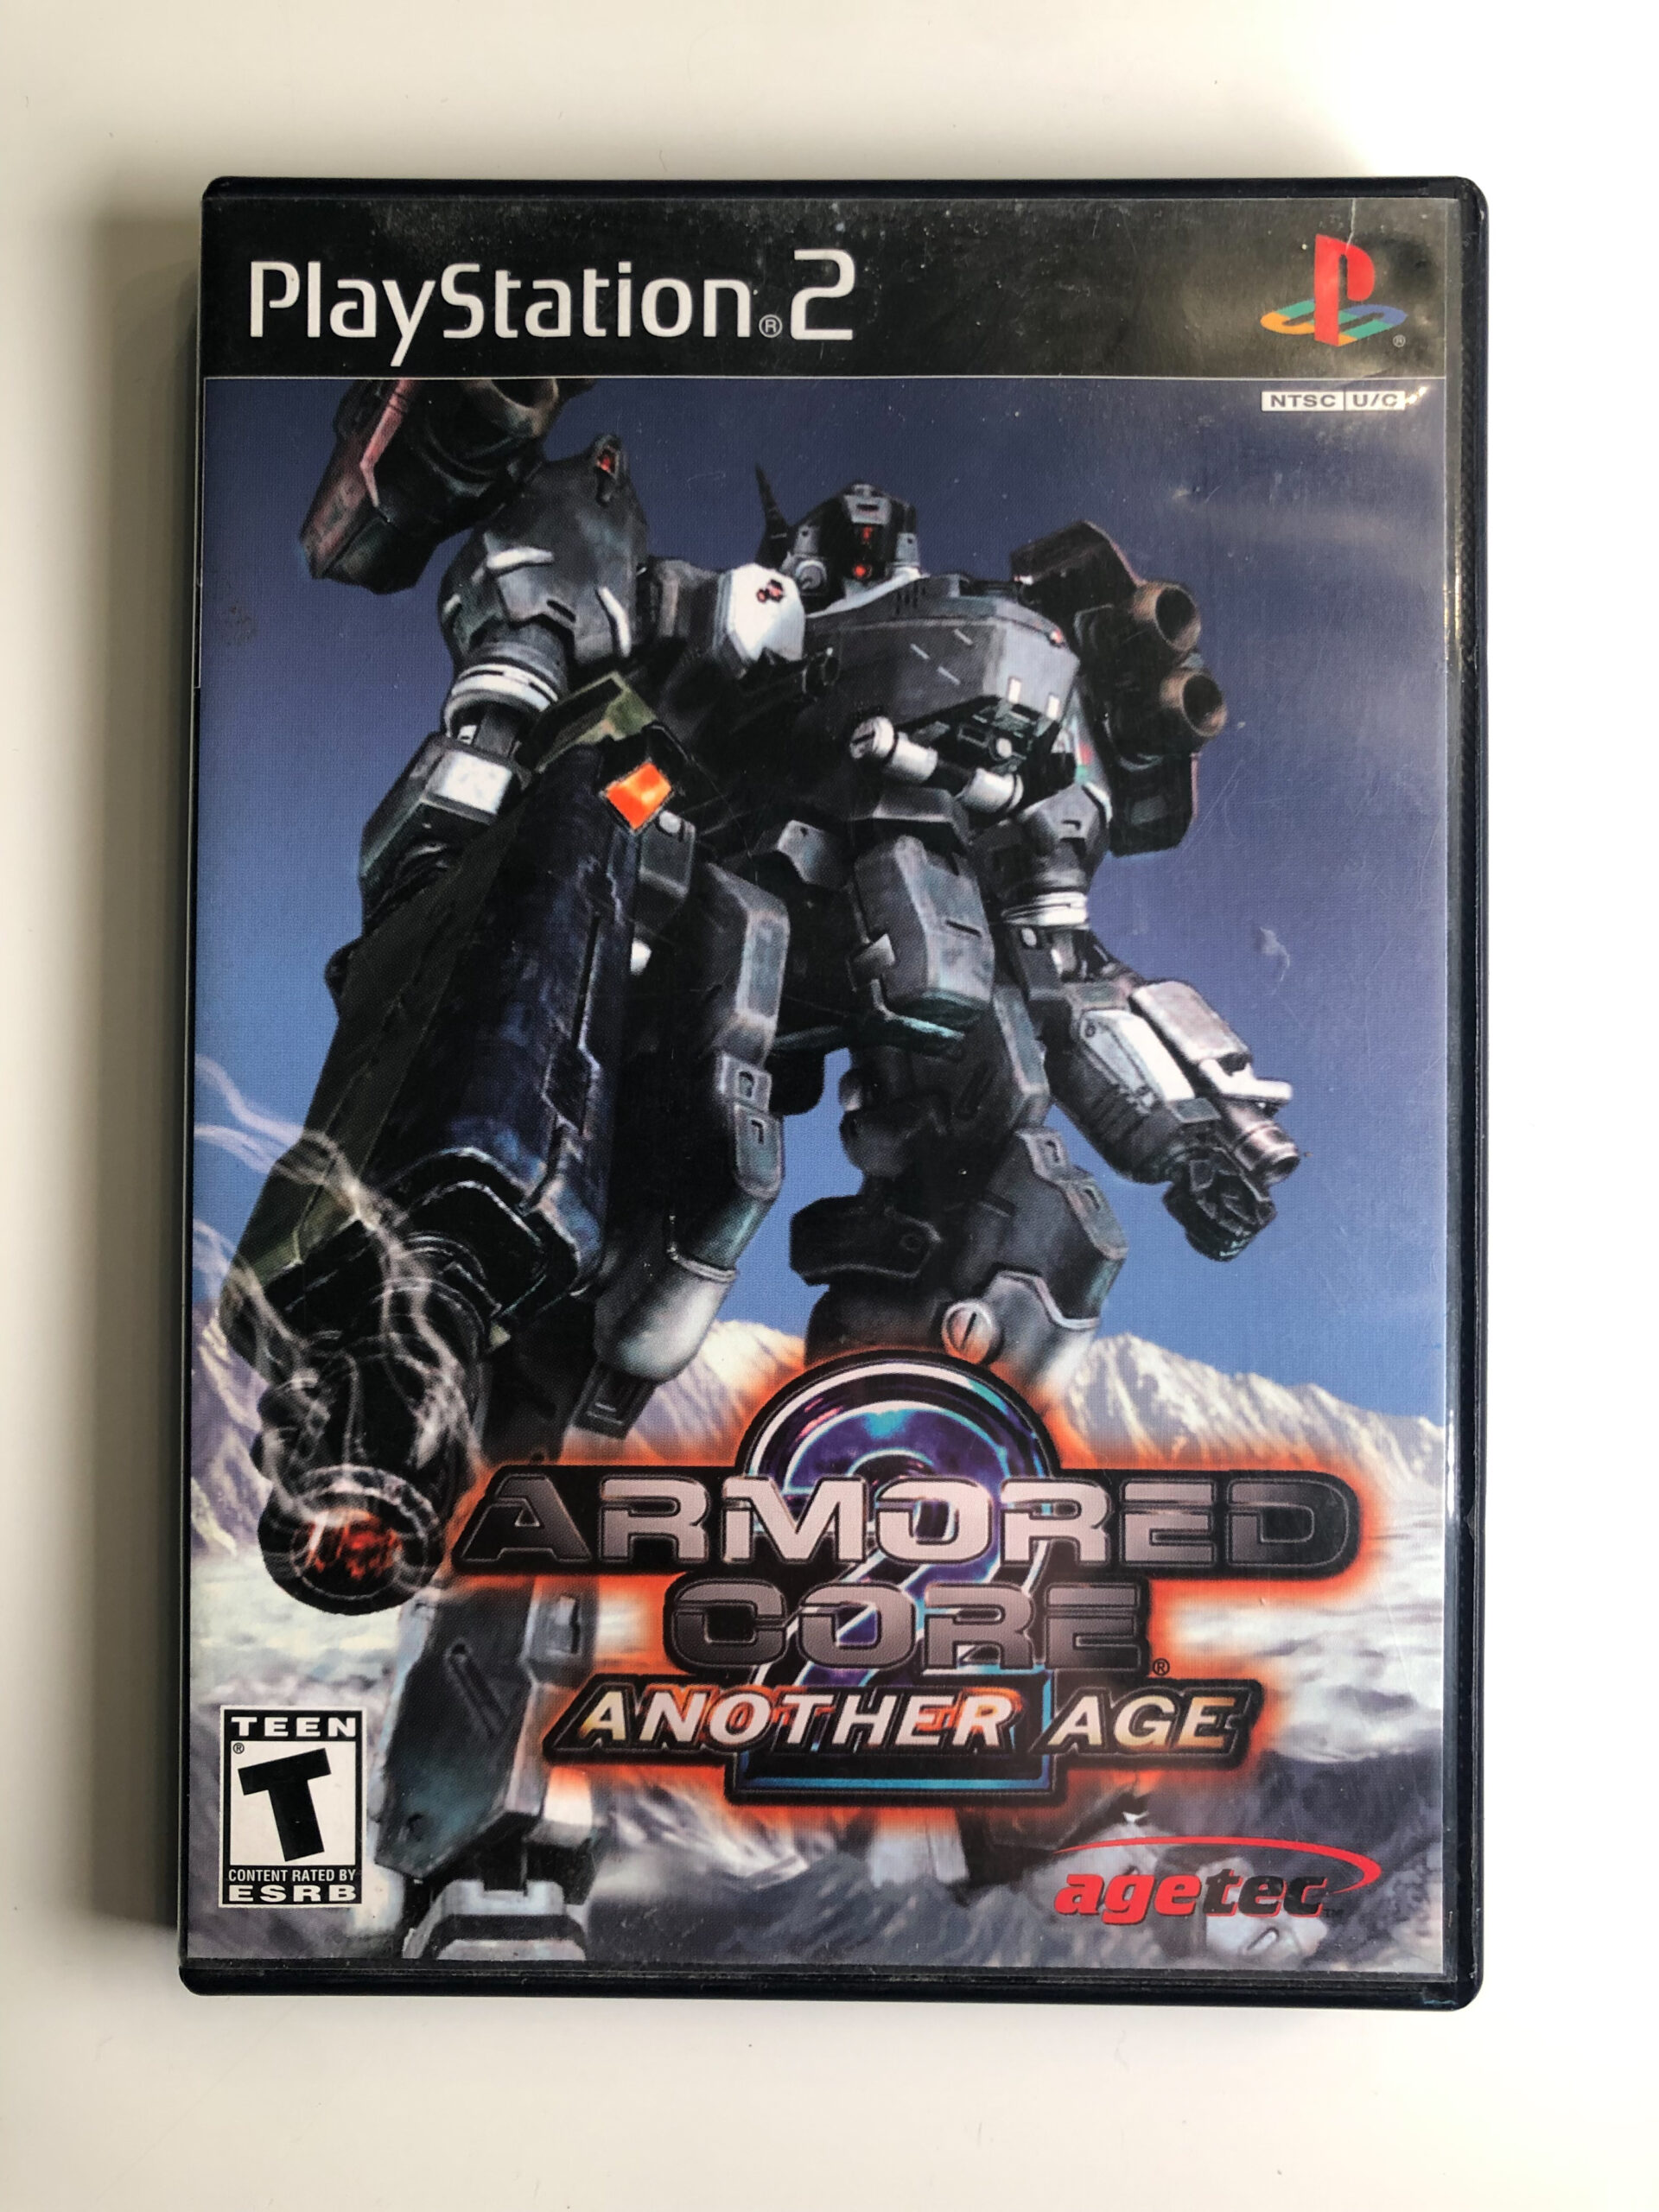 Armored Core 2: Another Age (Playstation 2, 2001), by Lork